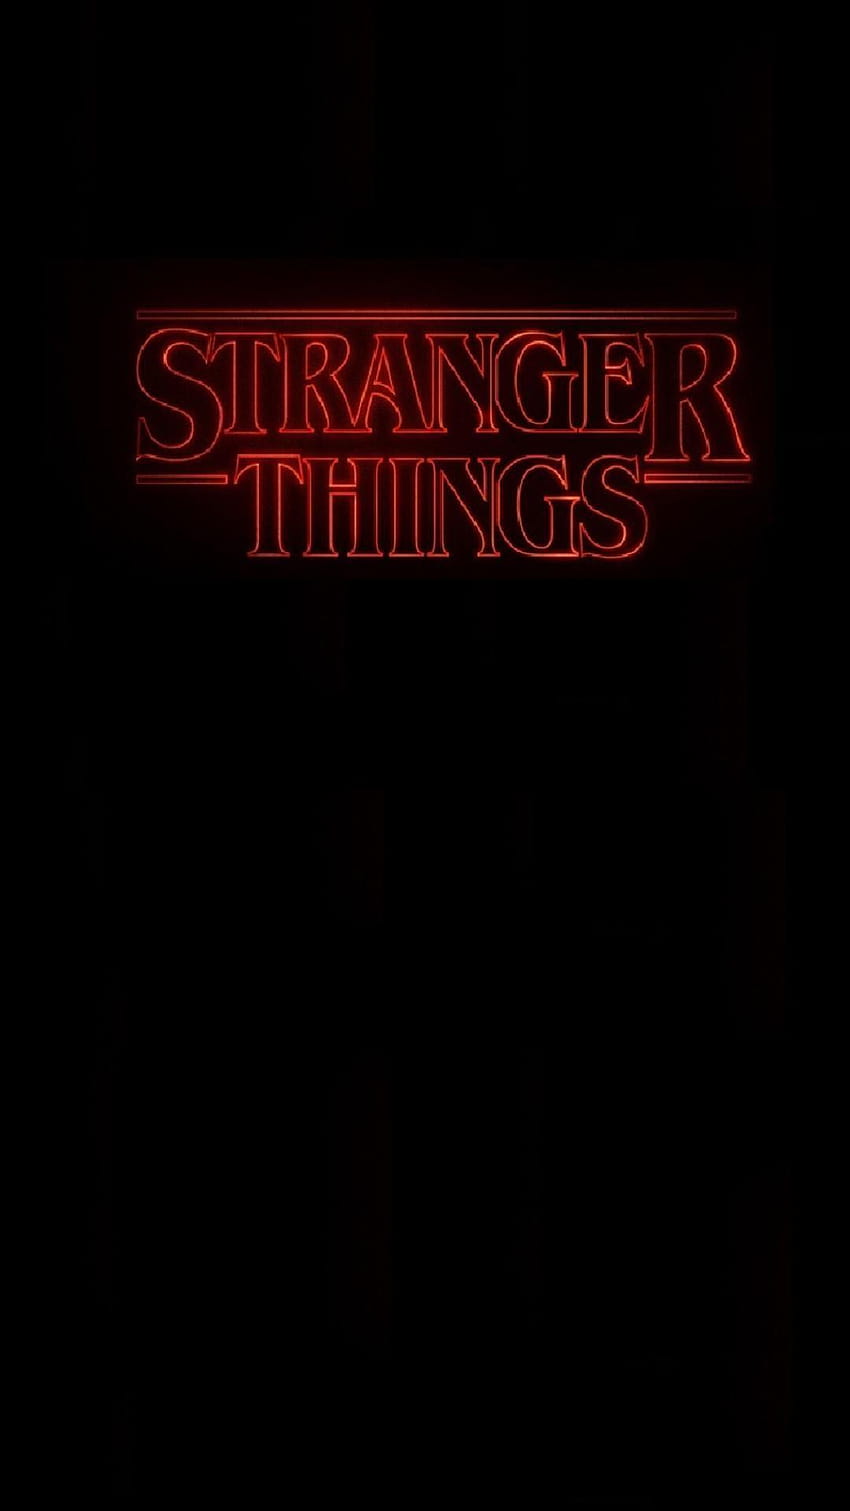 Arditto Raharjo on Iphone X in 2019, stranger things iphone x HD phone wallpaper